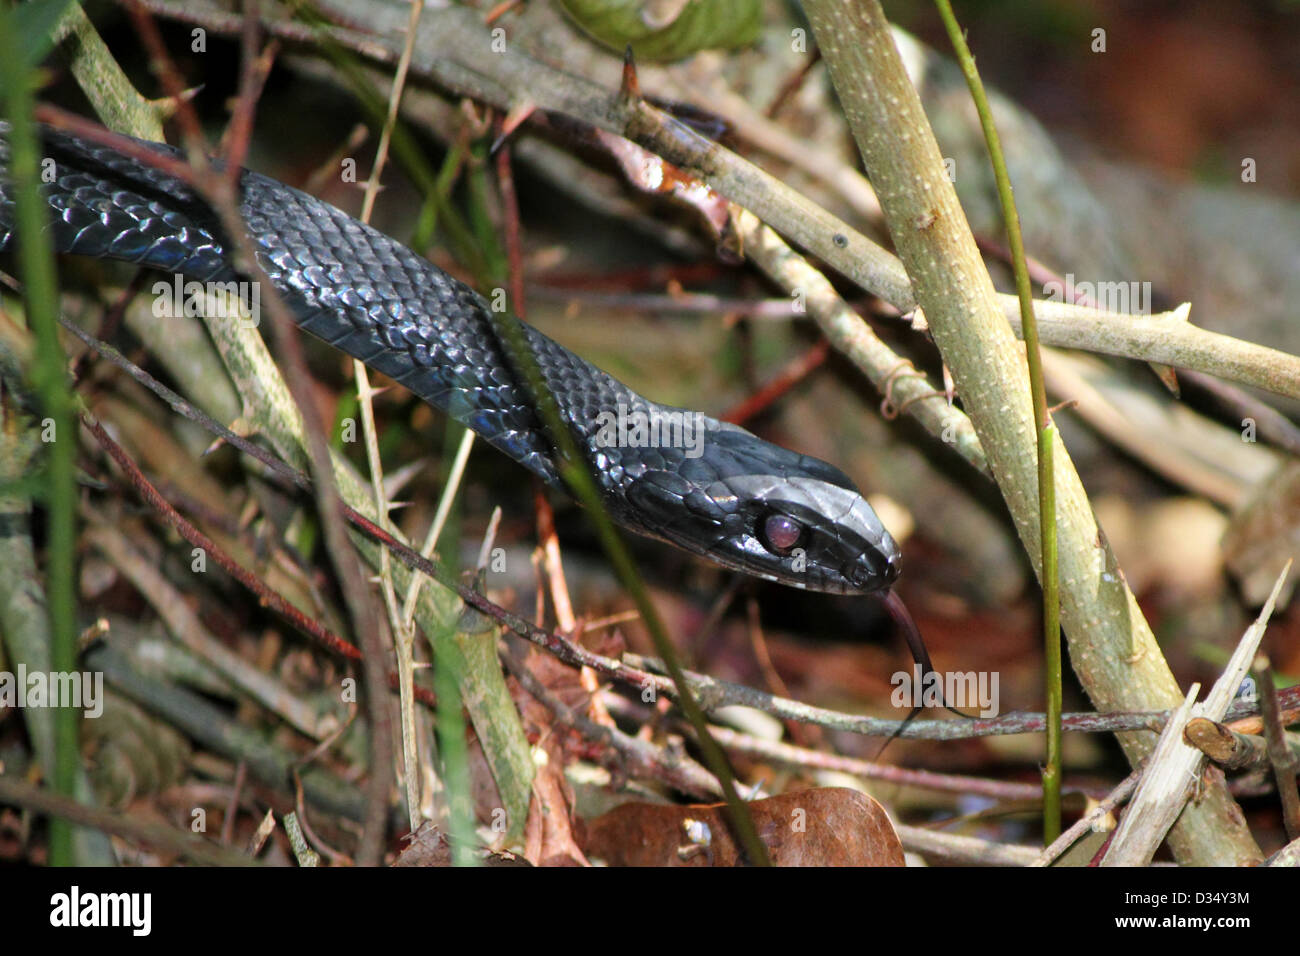 A Southern Black Racer snake slithers through the underbrush. Stock Photo